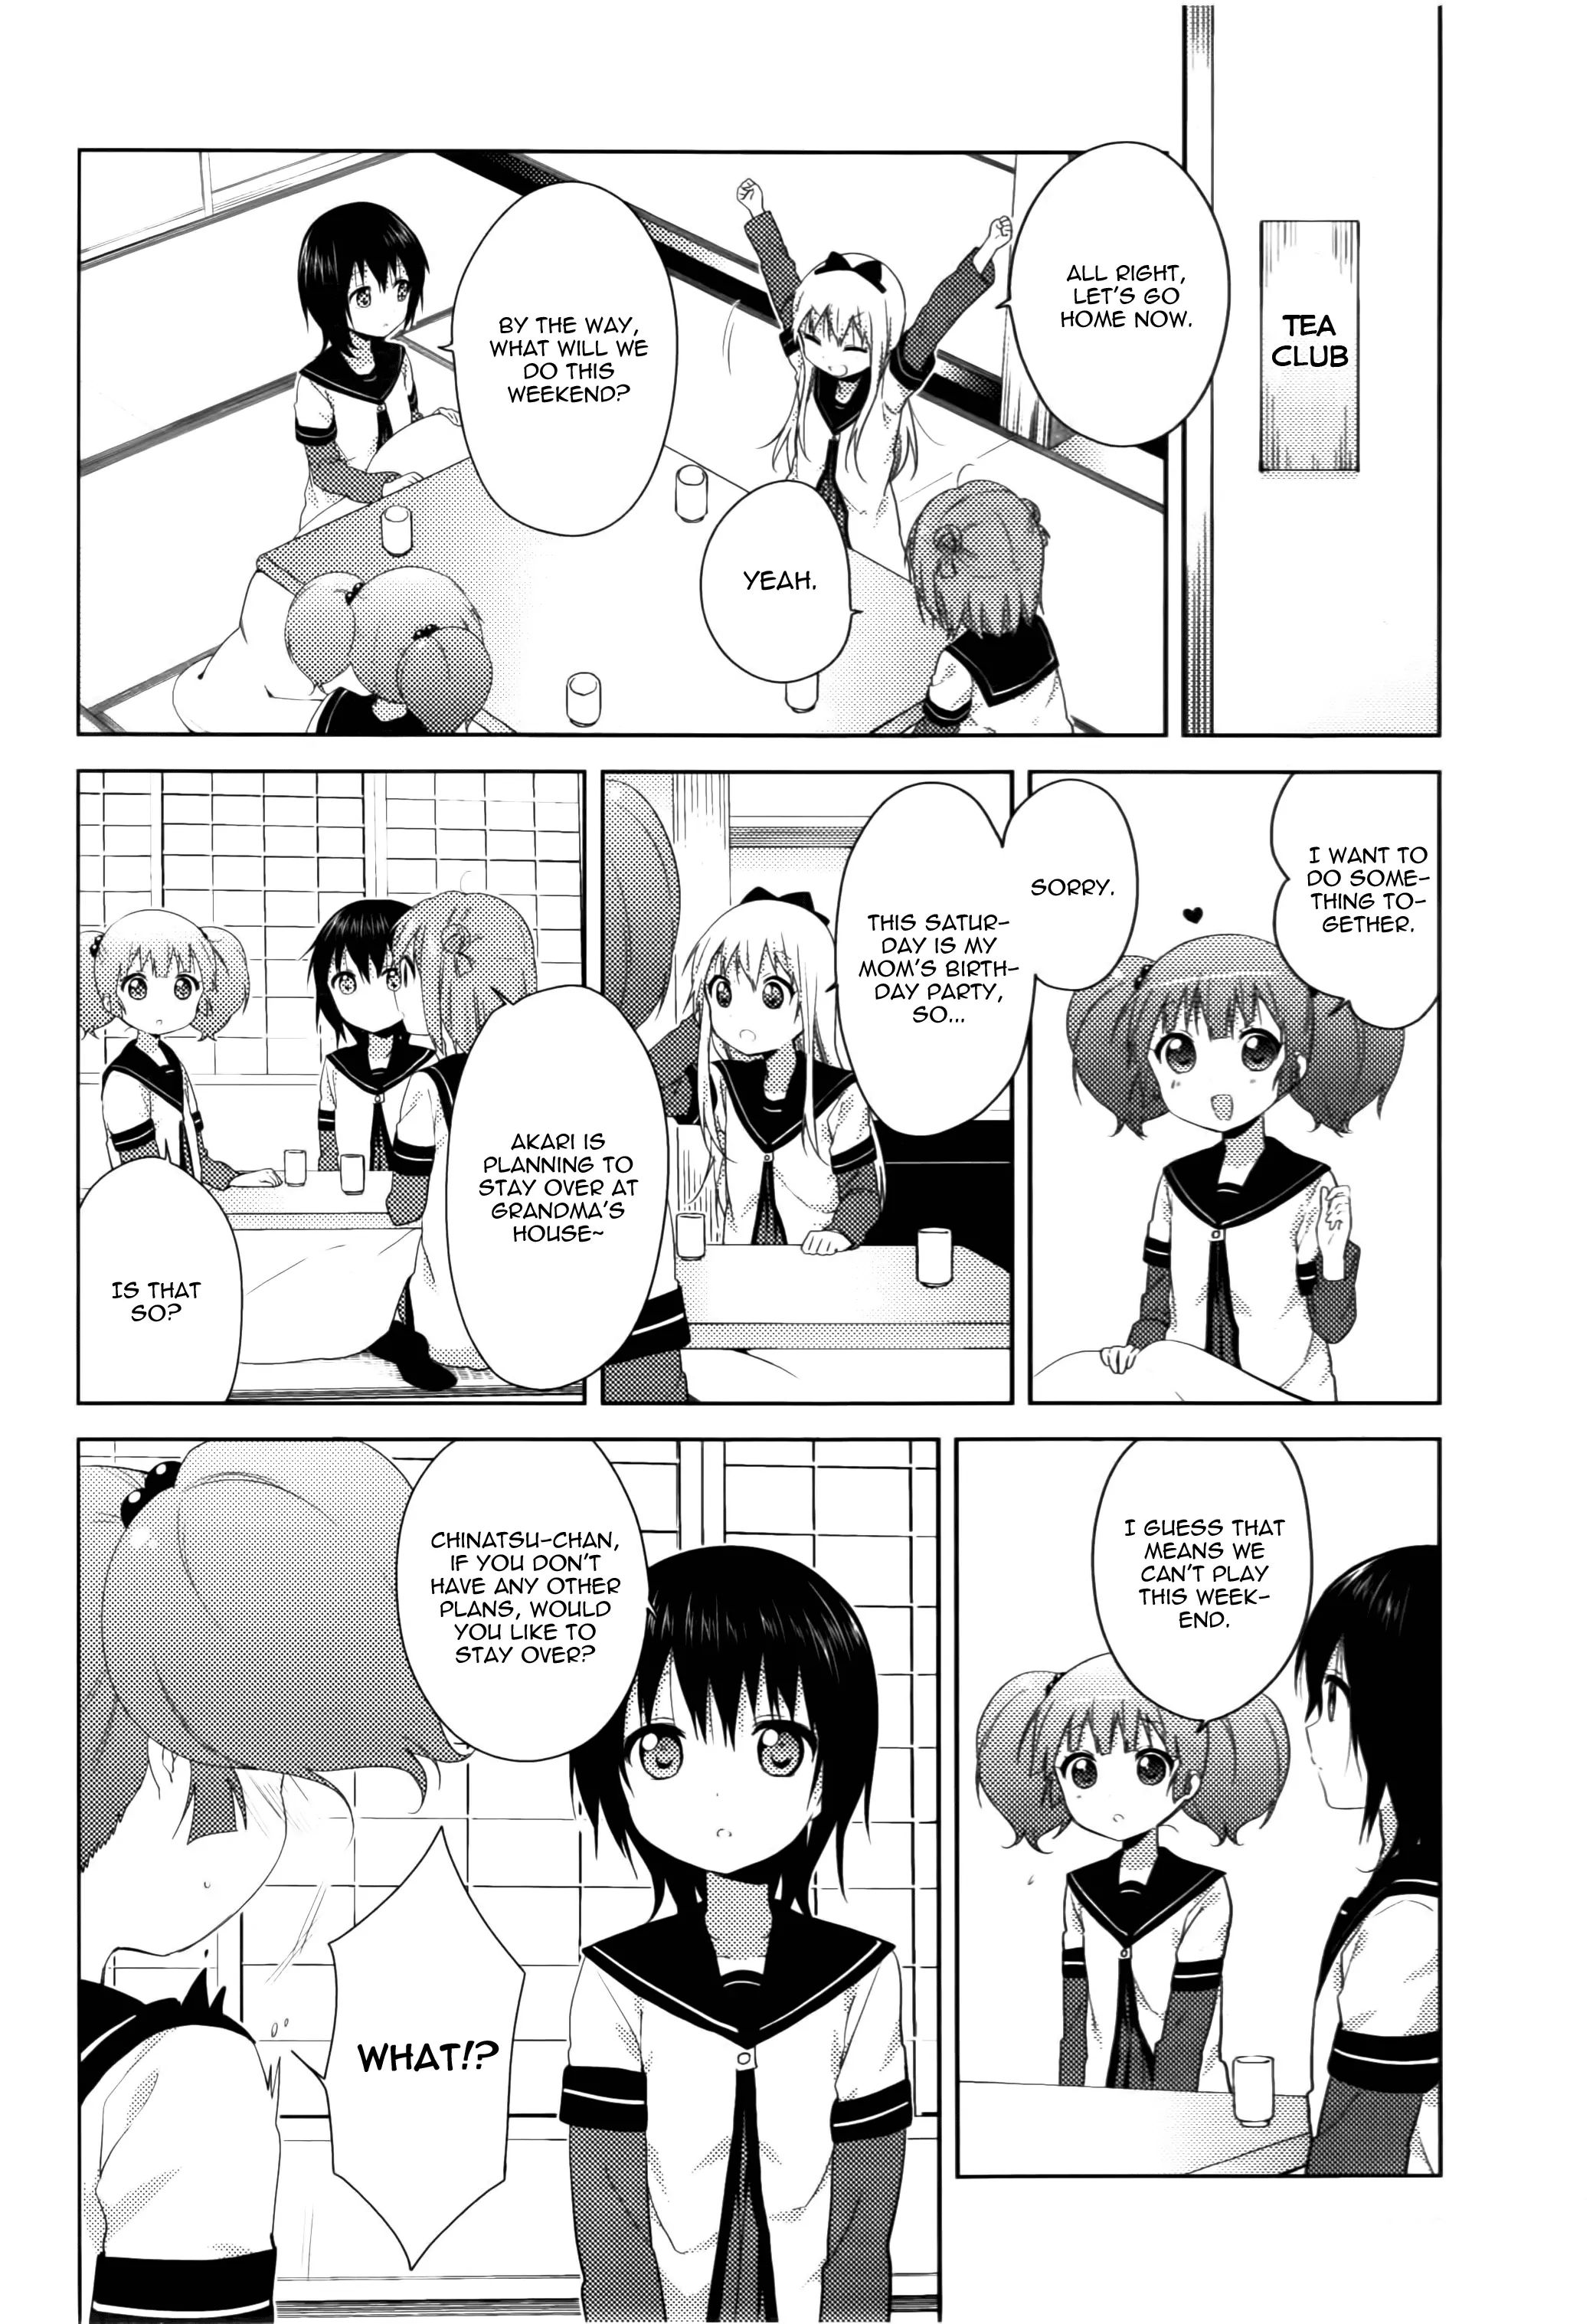 Yuru Yuri Vol.11 Chapter 78: Staying Over, Just The Two Of Us - Picture 3